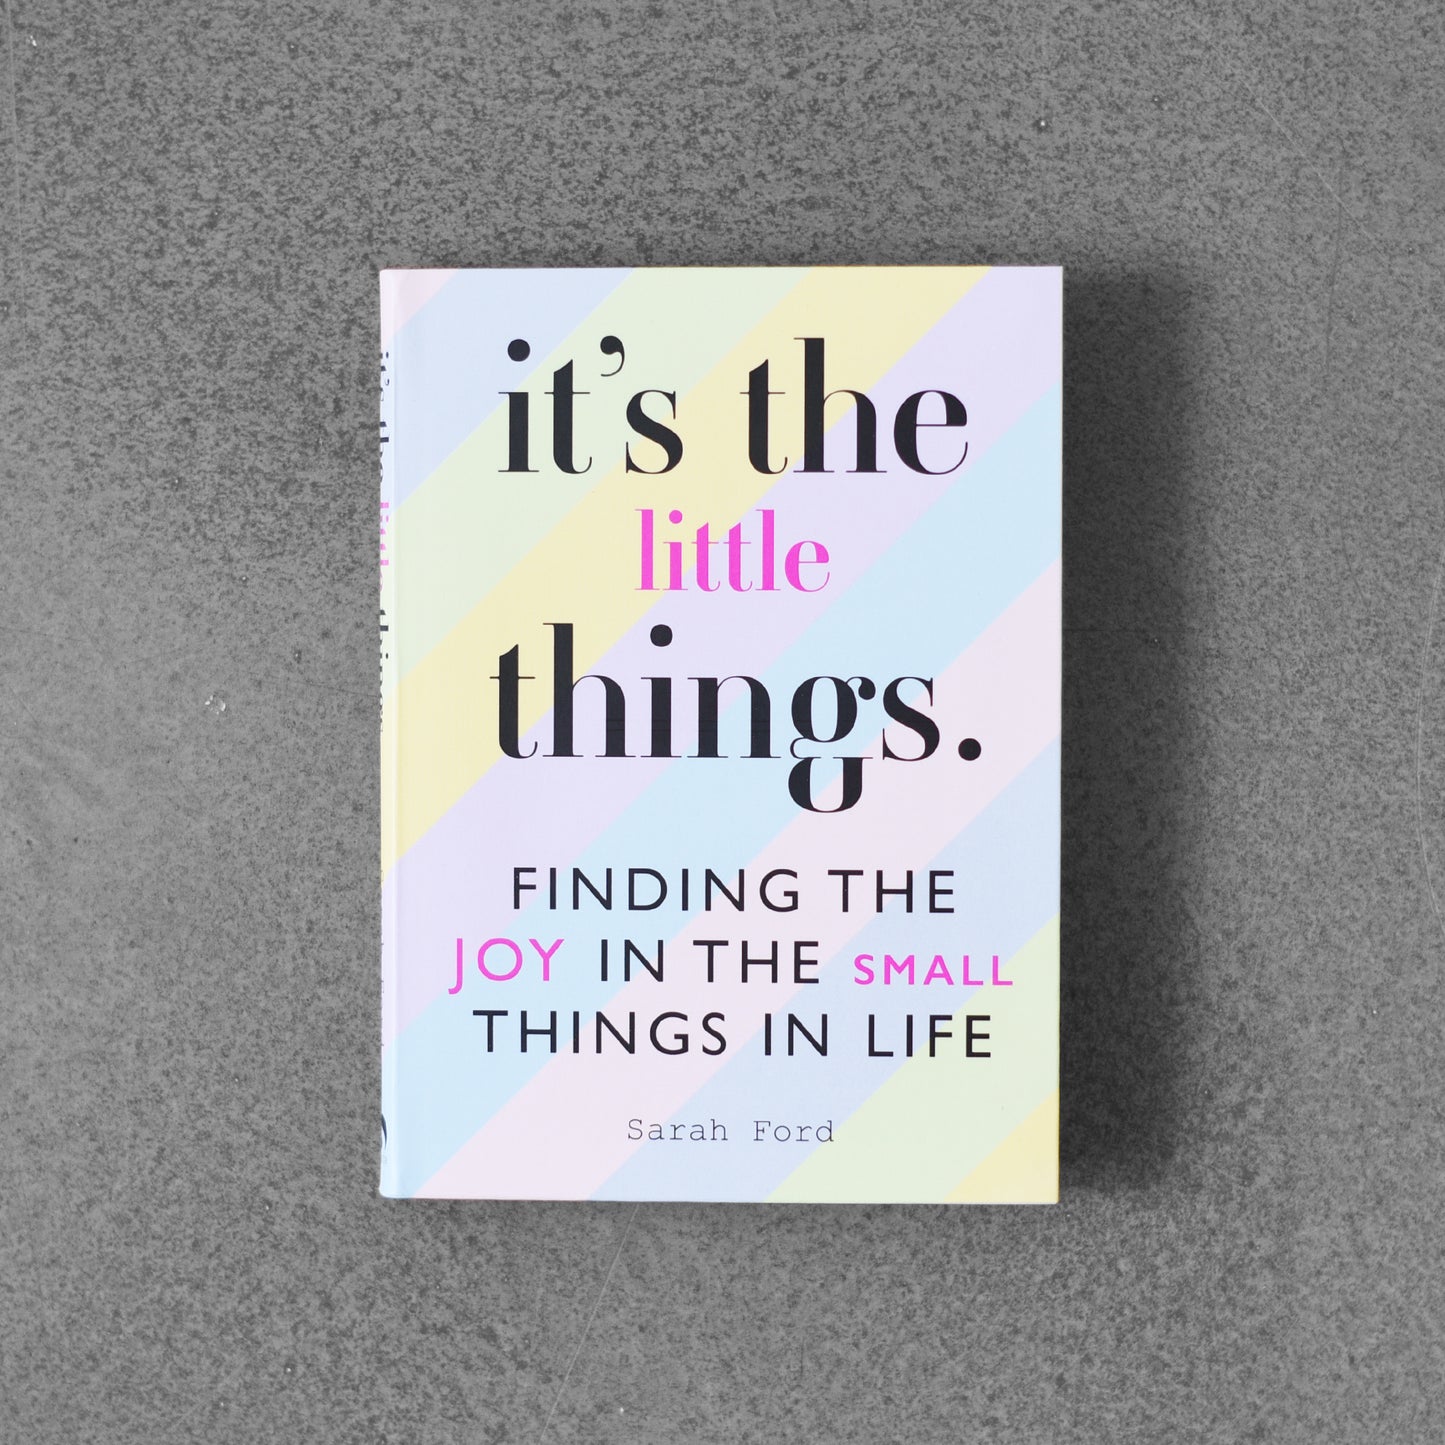 It’s the Little Things. Finding the Joy in the Small Things in Life - Sarah Ford